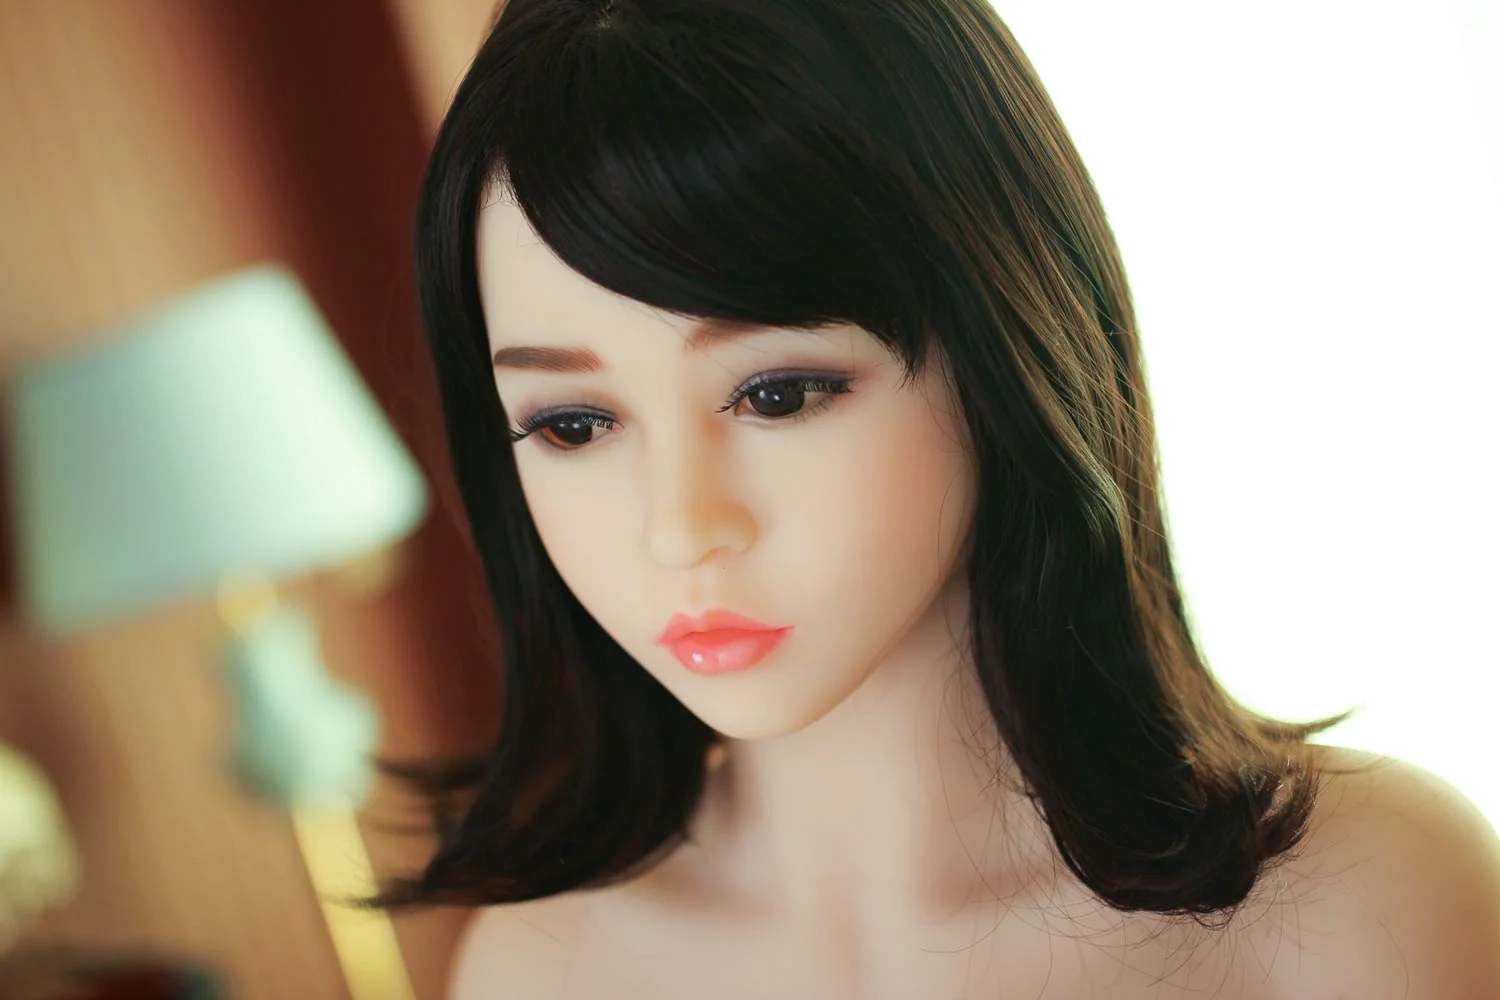 Sex doll with black short hair